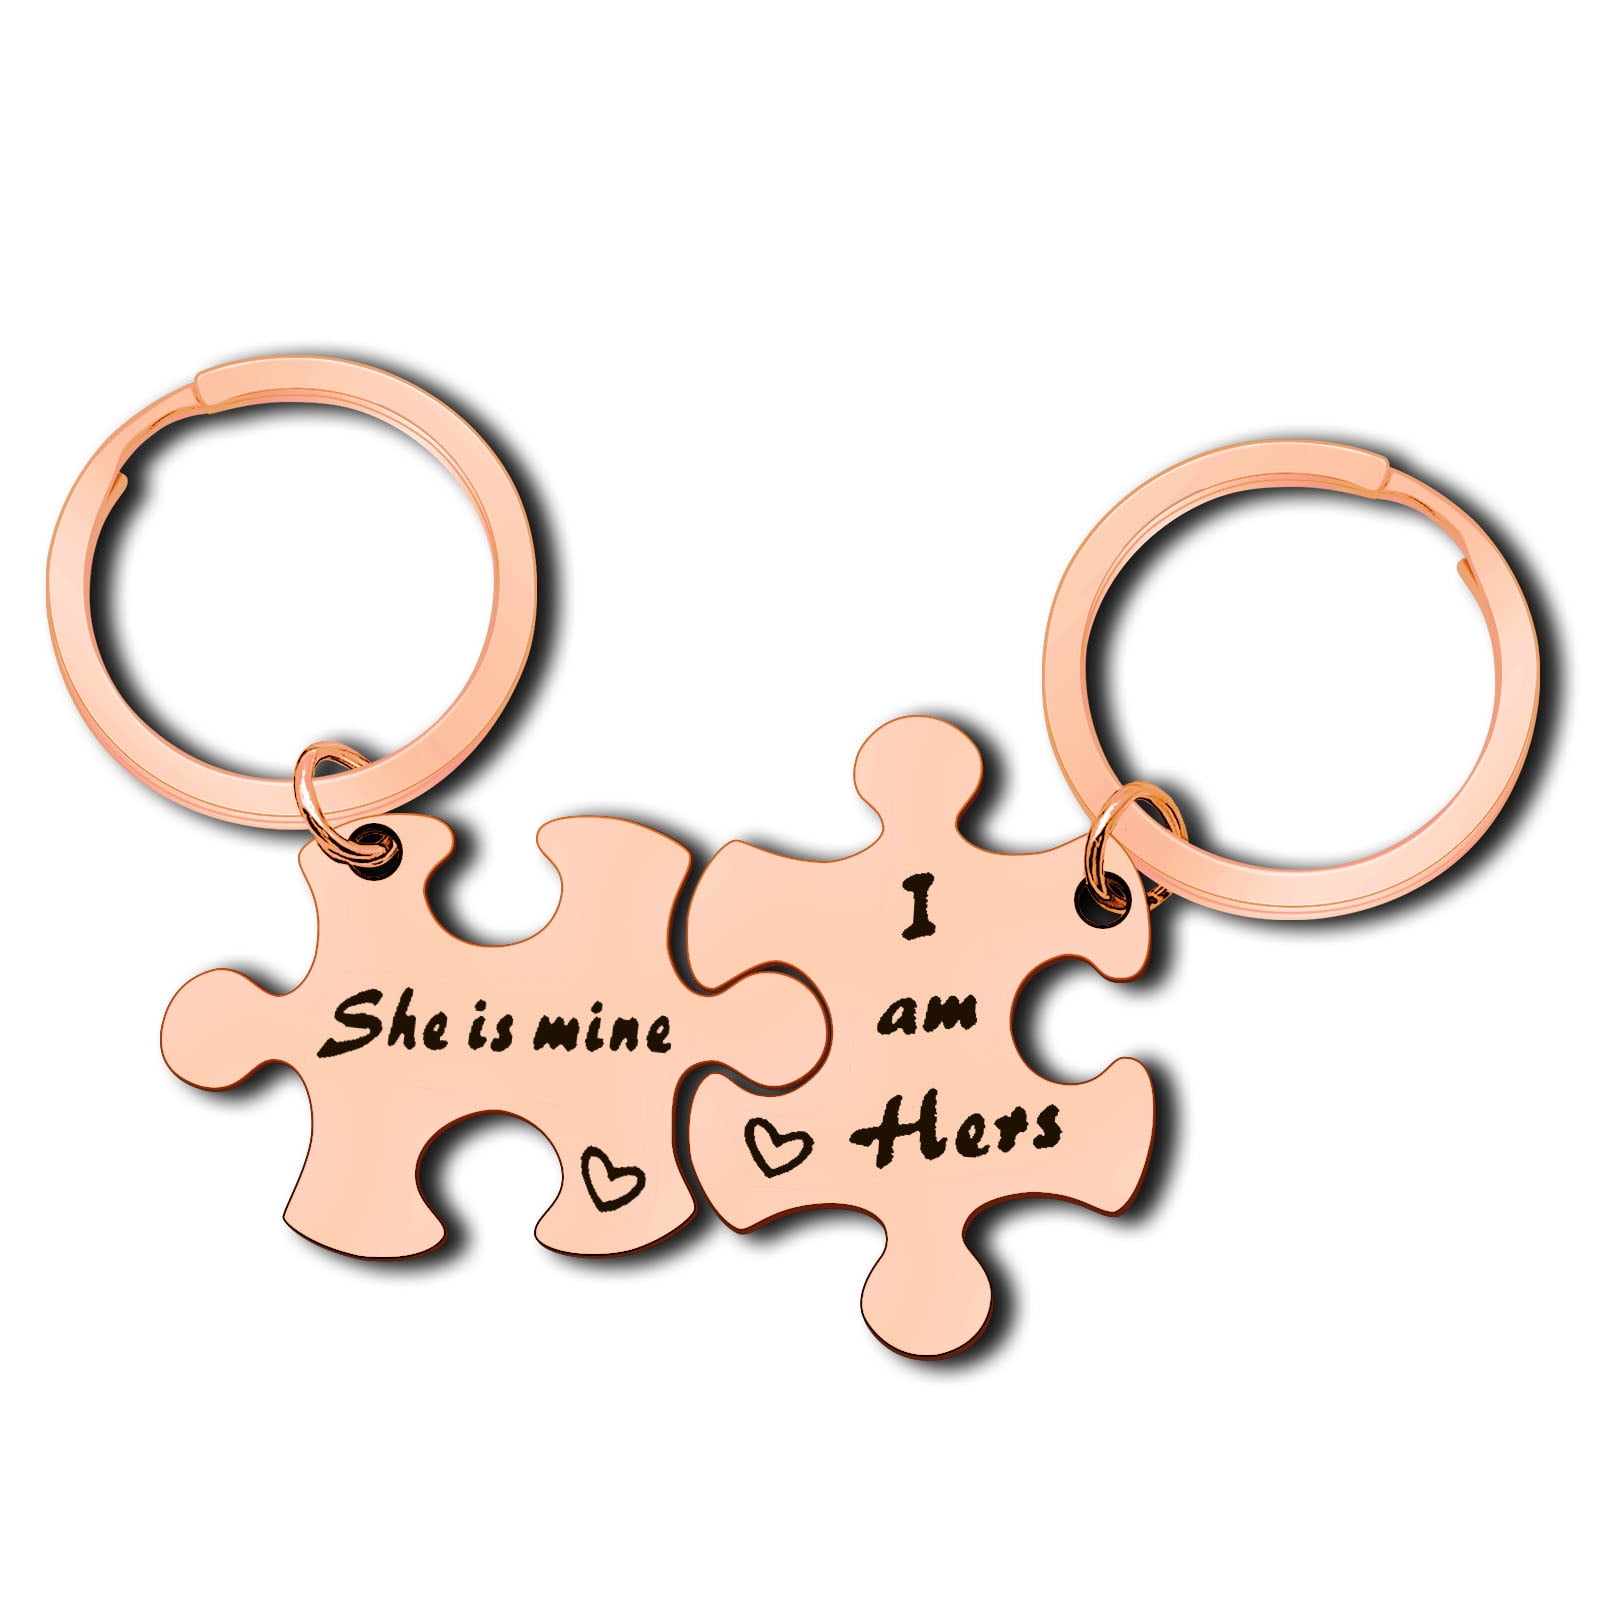 Lesbian Couples Gifts I am Hers She is Mine Puzzle Couple Keychain Set LGBT Lesbian Girlfriend Wife Wedding Gift Gay Lesbian Couples Jewelry Engagement Valentines Day Gifts LGBT Gifts for Girlfriend -